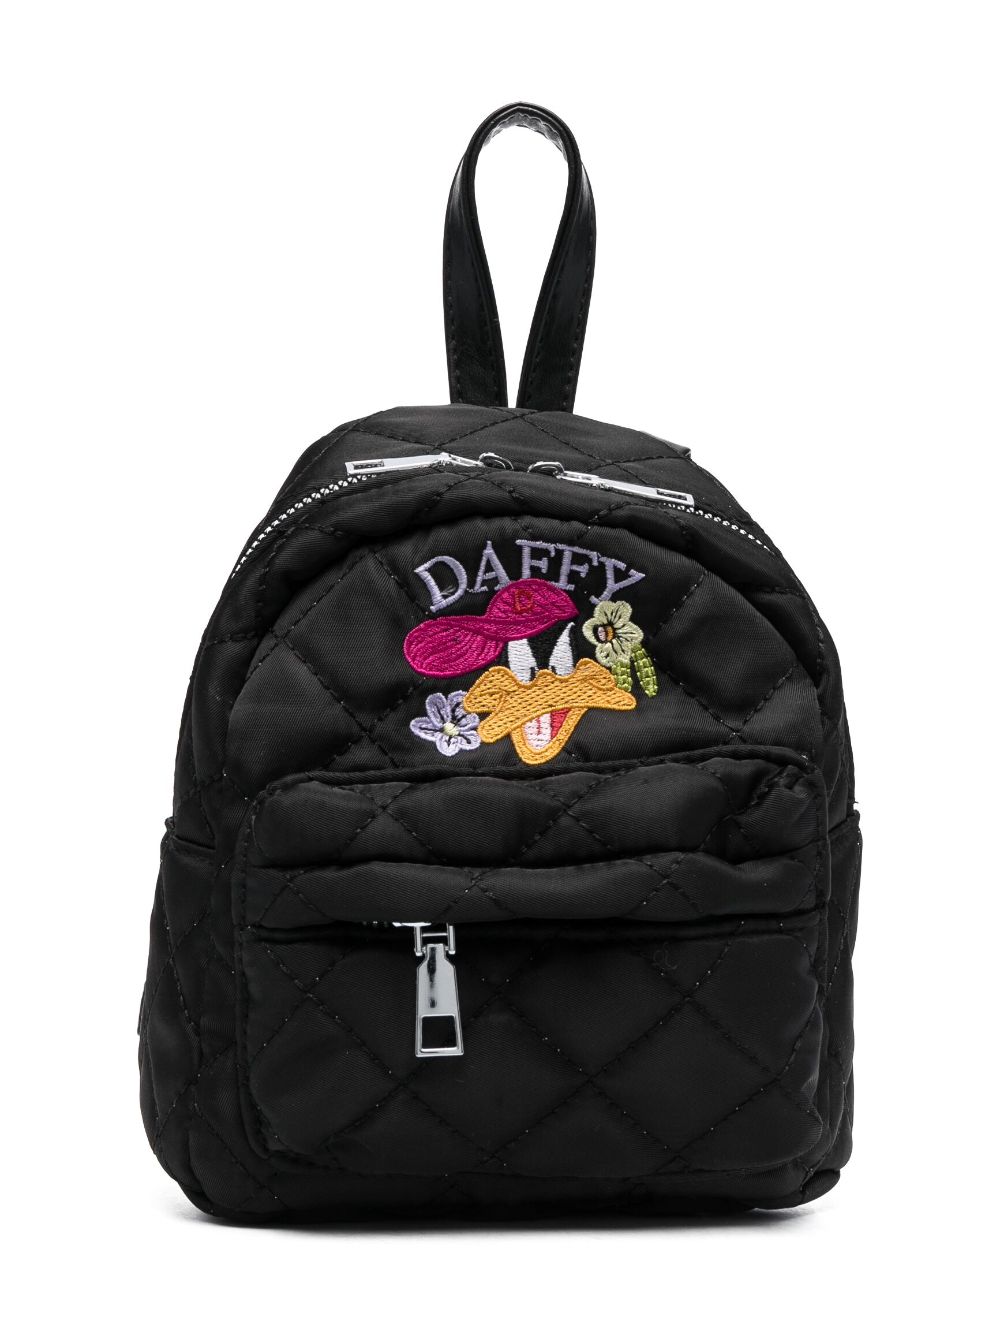 Monnalisa Daffy-embroidered quilted backpack - Black von Monnalisa